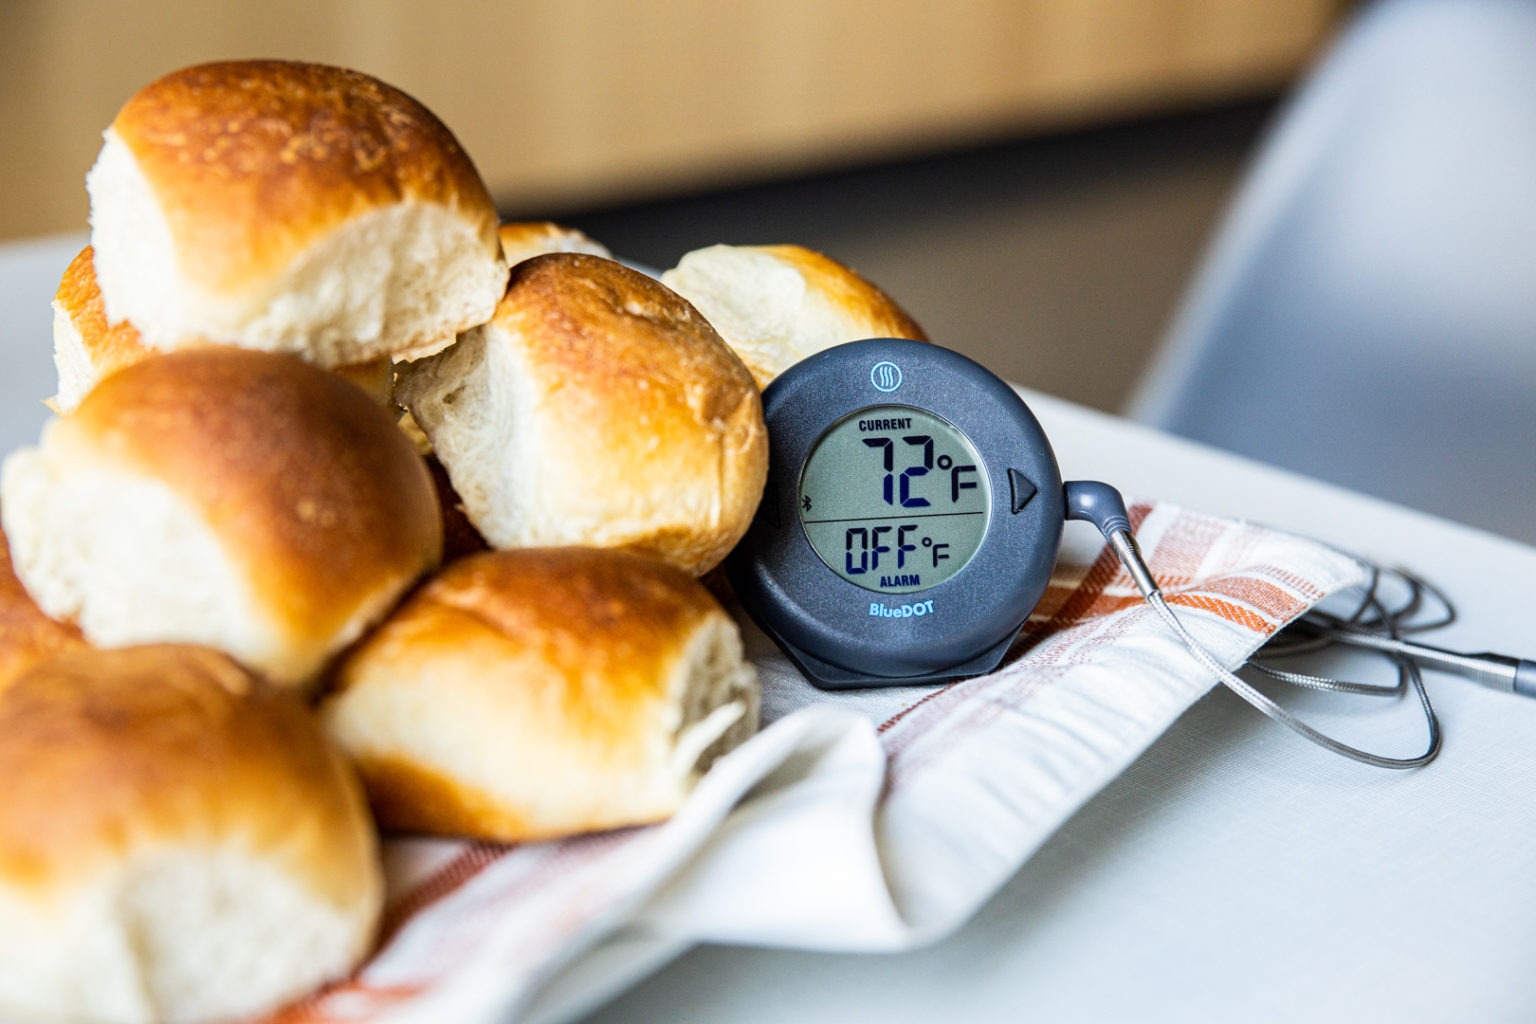 ThermoWorks DOT Bluetooth Thermometer Review Winner - Smoking Meat